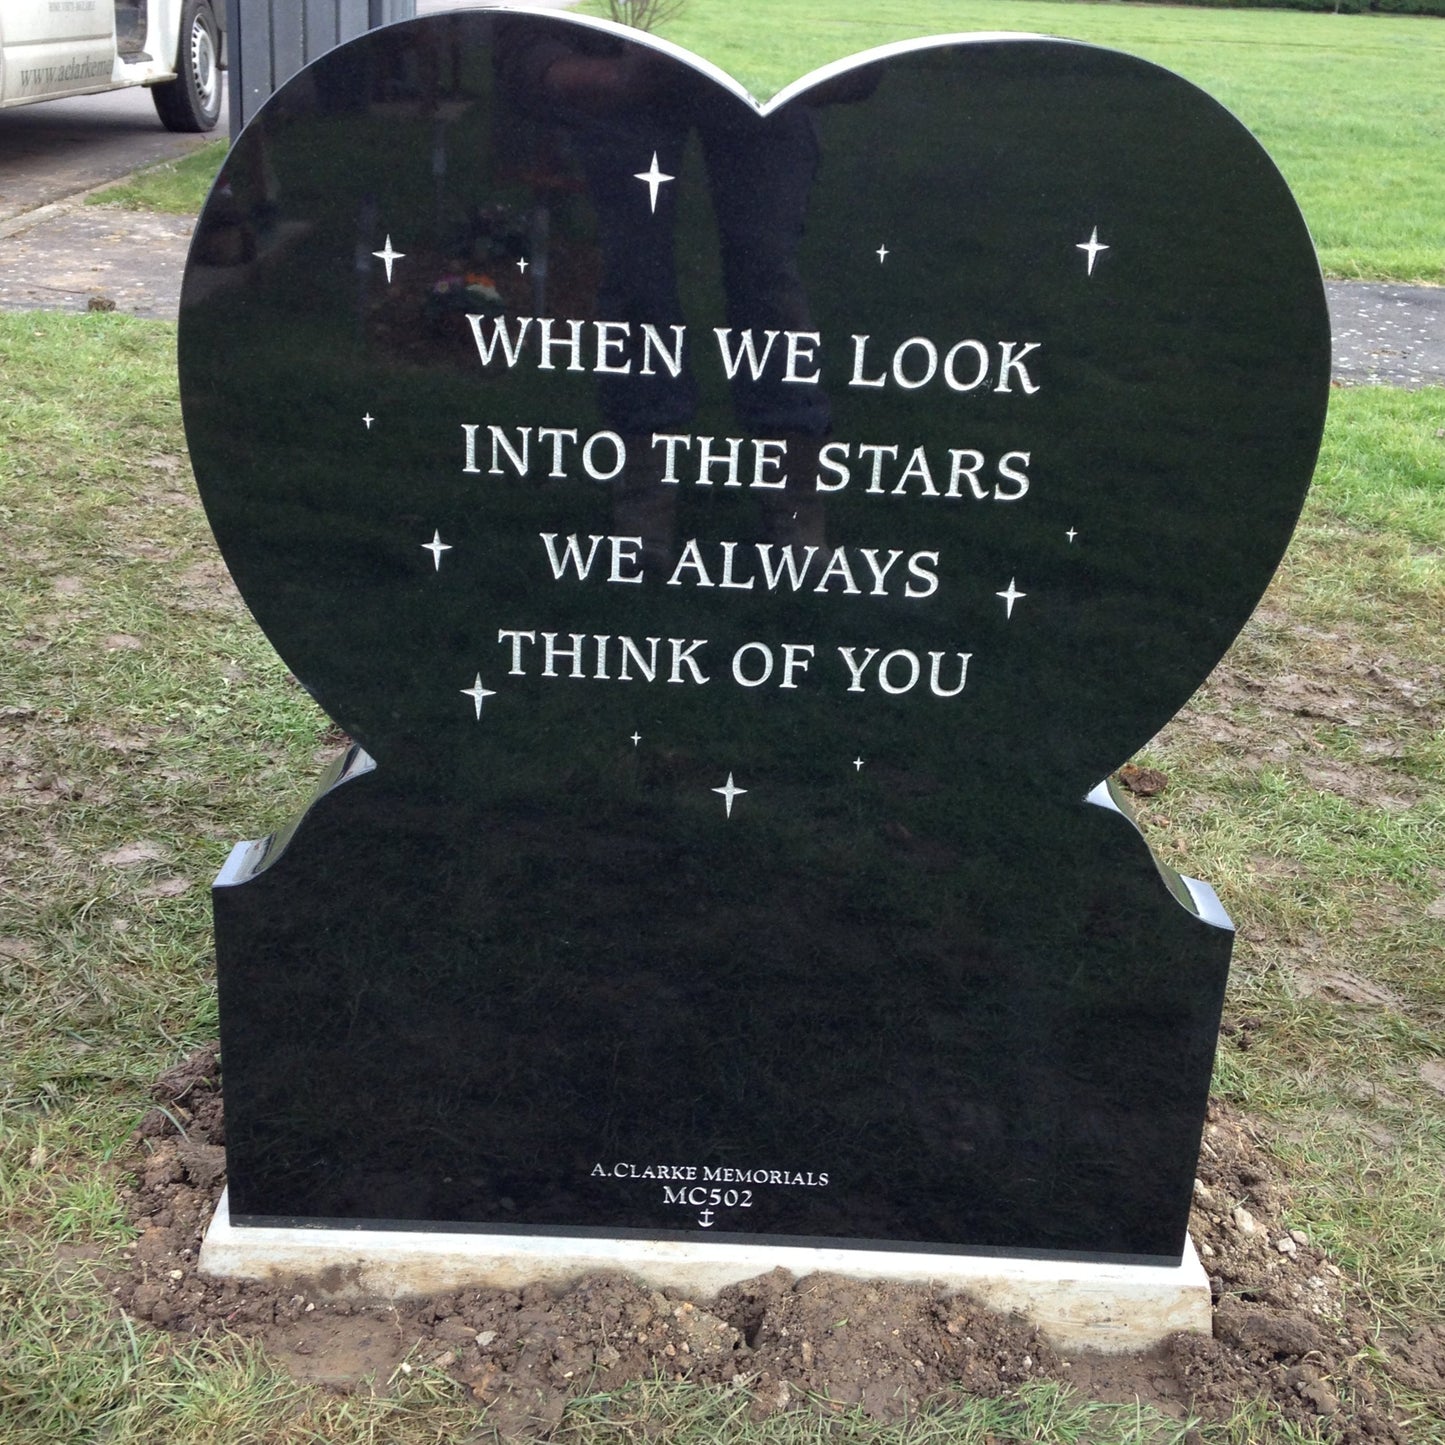 Heart shaped headstone with curved foot kerb and raised heart